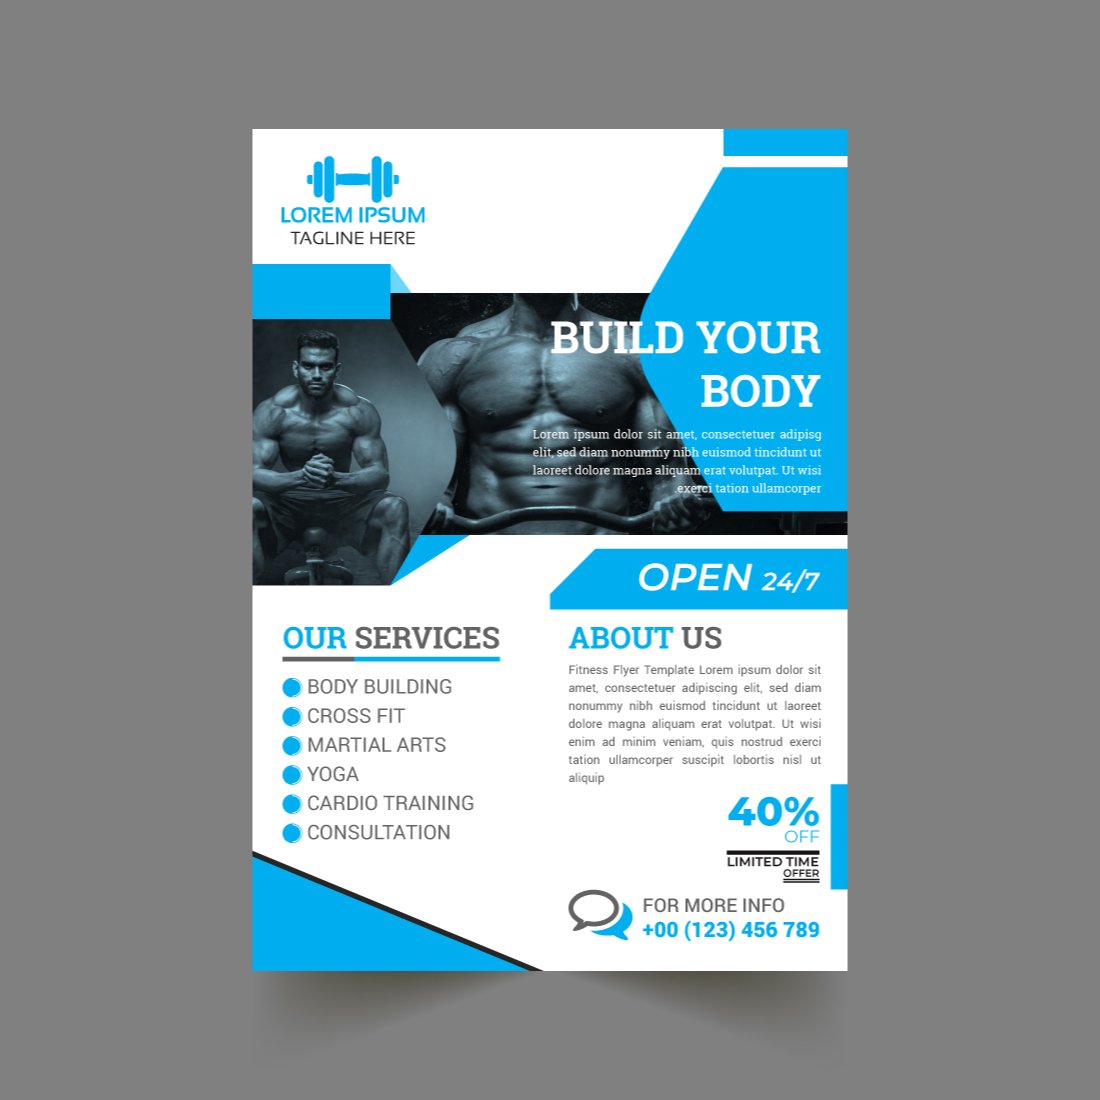 Fitness Gym Flyer Template cover image.